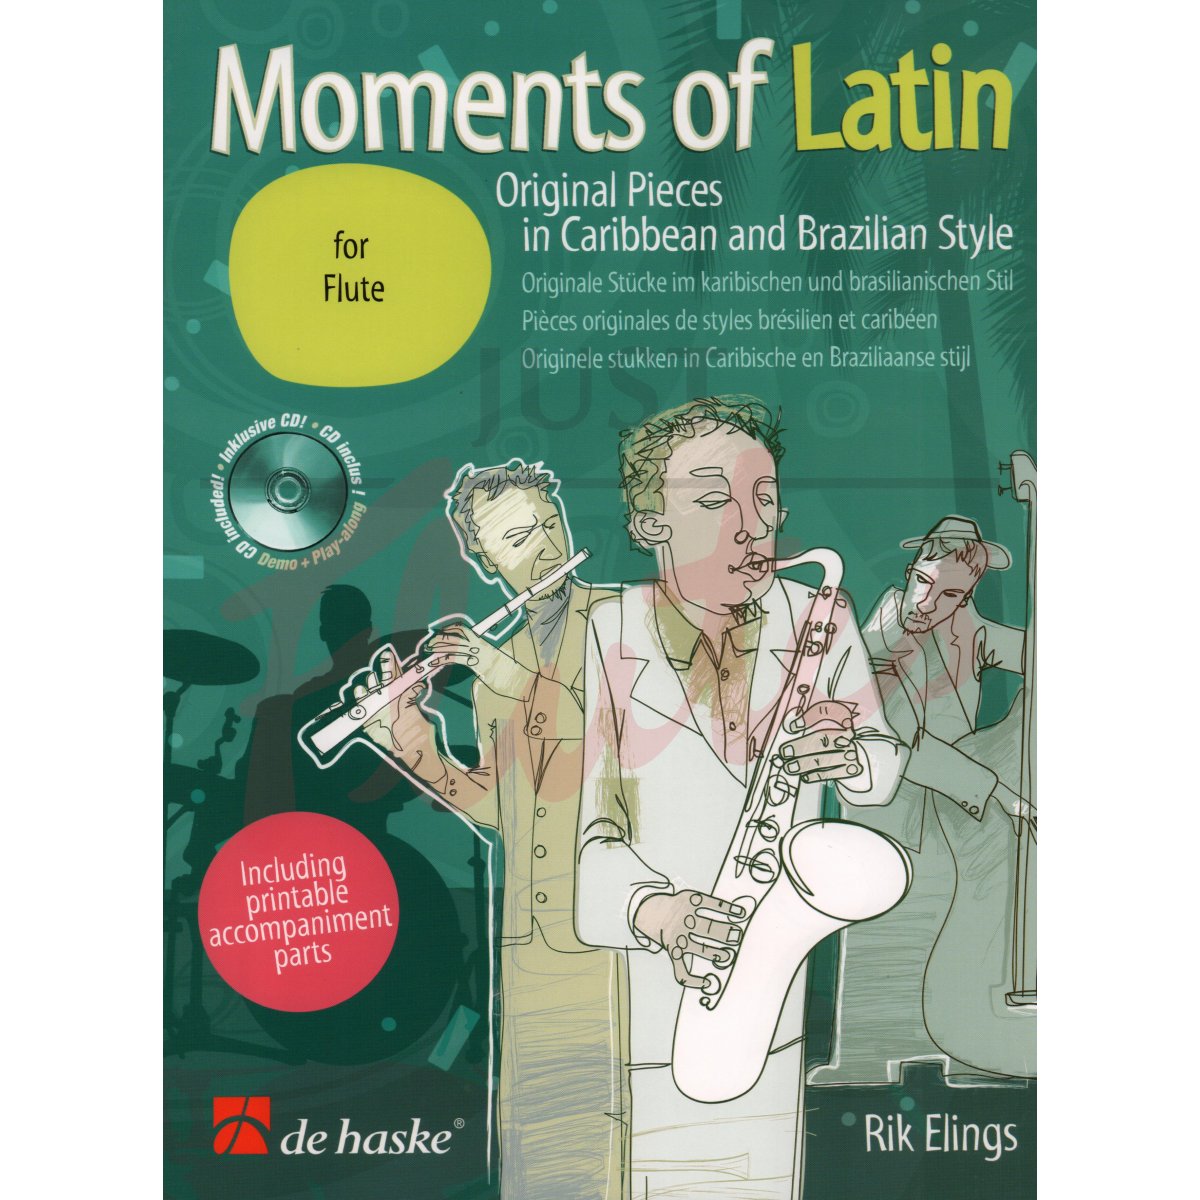 Moments of Latin: Original Pieces in Caribbean and Brazilian Styles